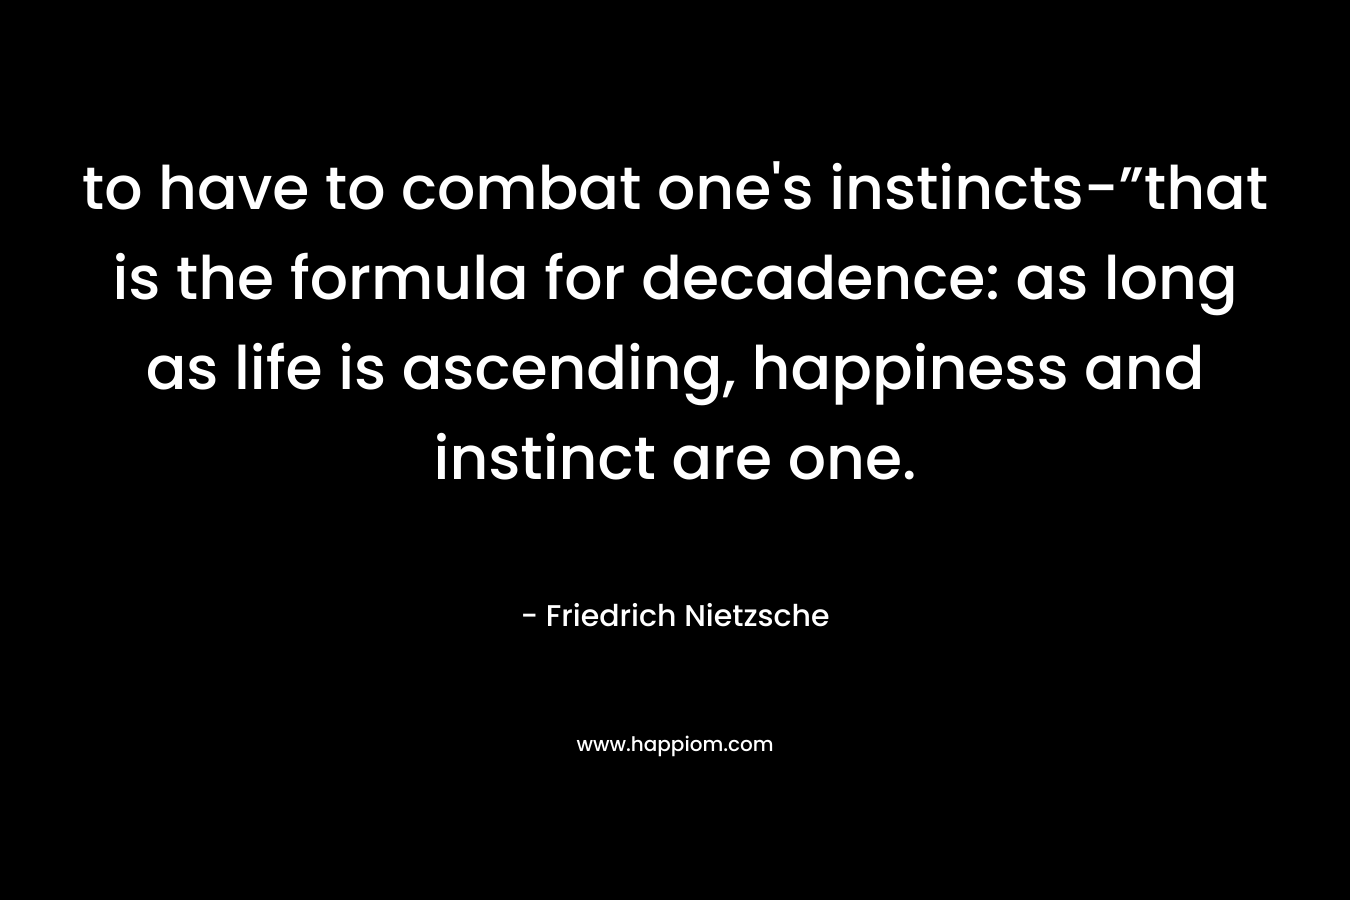 to have to combat one's instincts-”that is the formula for decadence: as long as life is ascending, happiness and instinct are one.